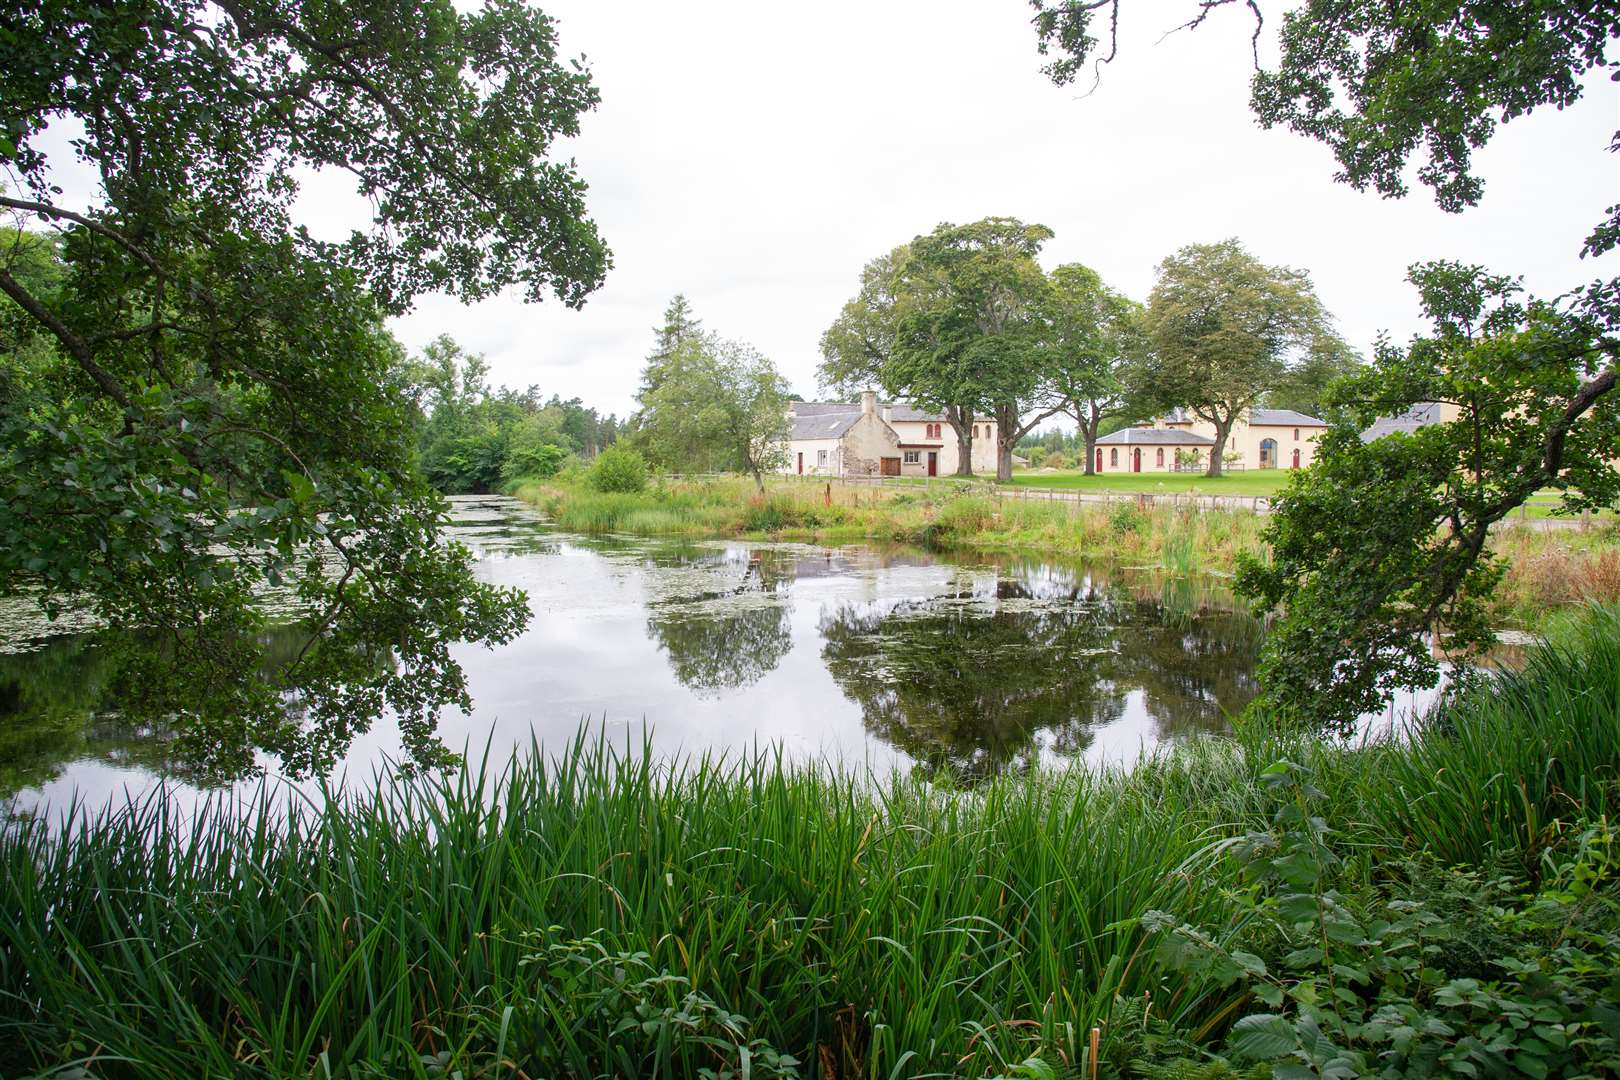 A nearby established water feature on the Altyre Estate.